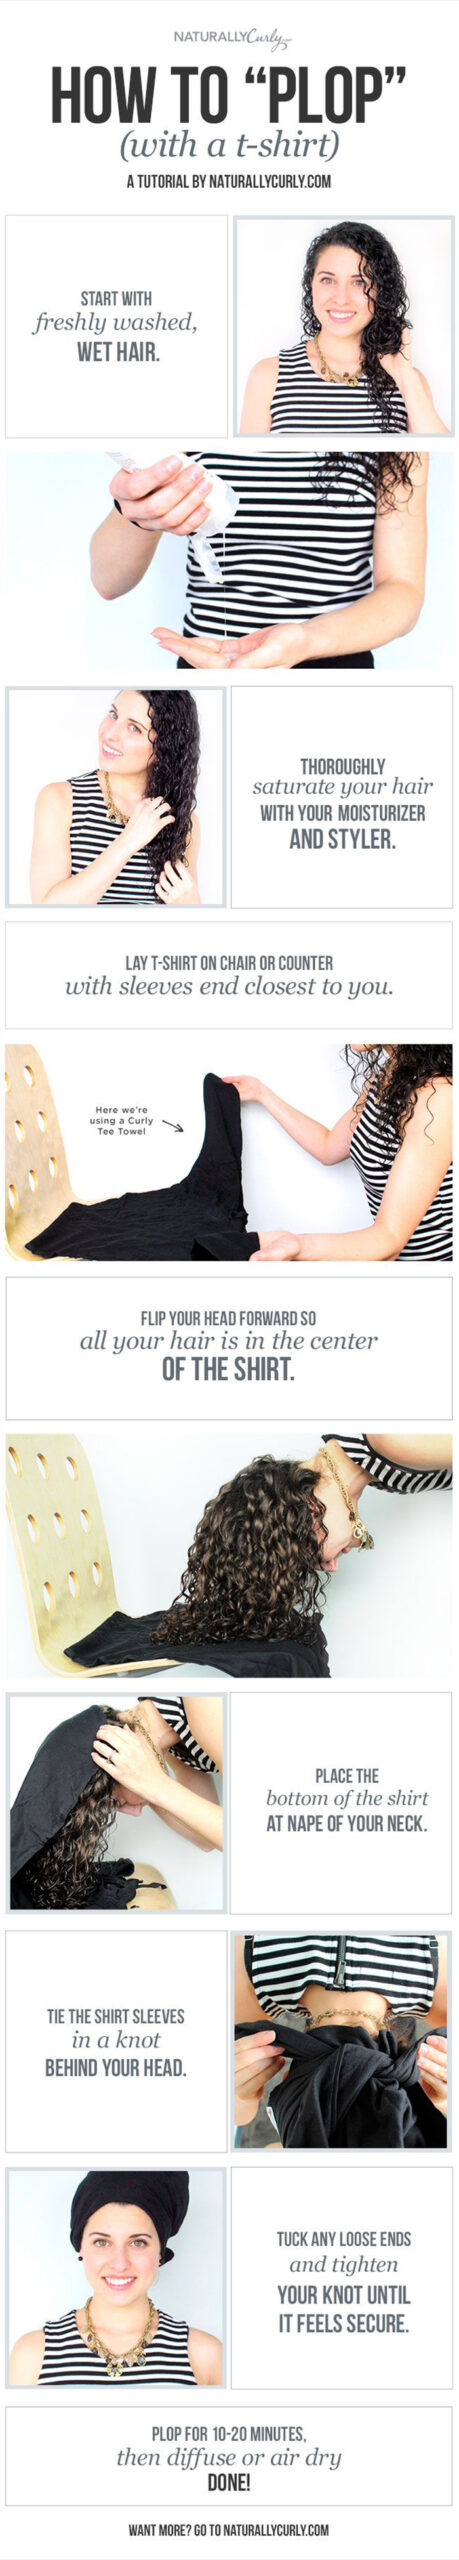 How to Plop Curly Hair: A Curly Girl’s Guide